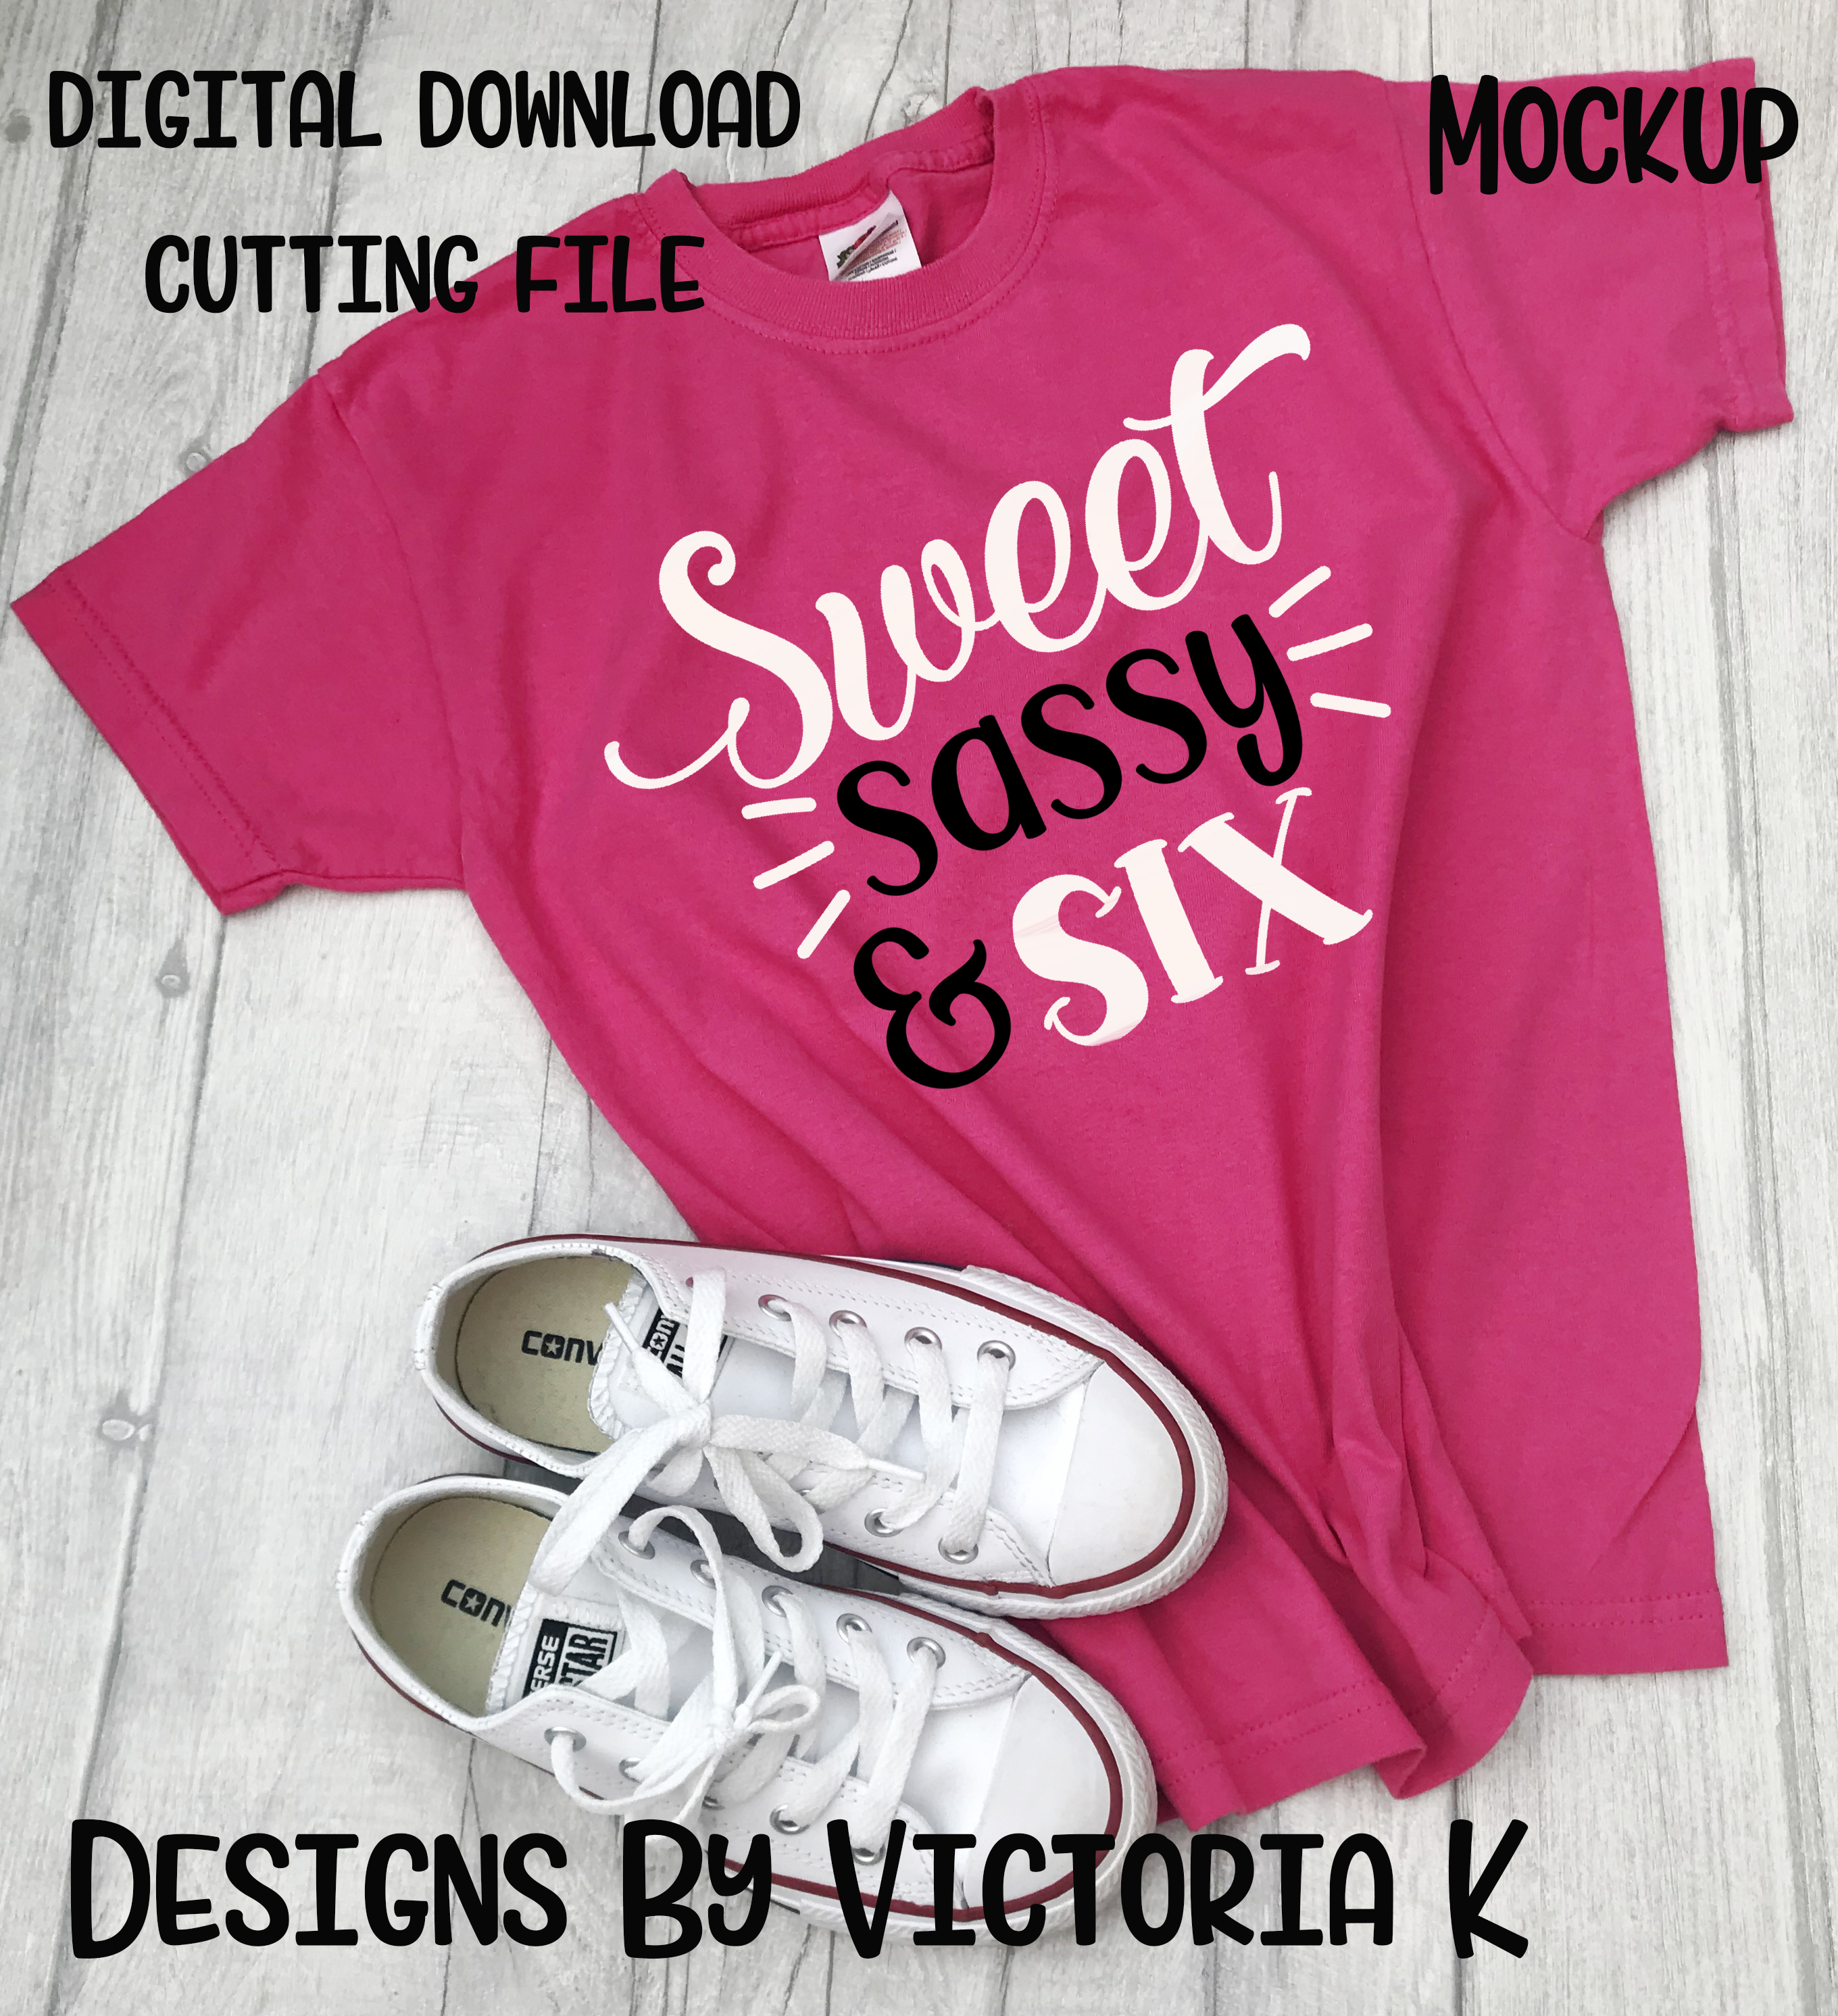 Download Sweet Sassy and Six, 6th Birthday, SVG, DXF, PNG (57952 ...